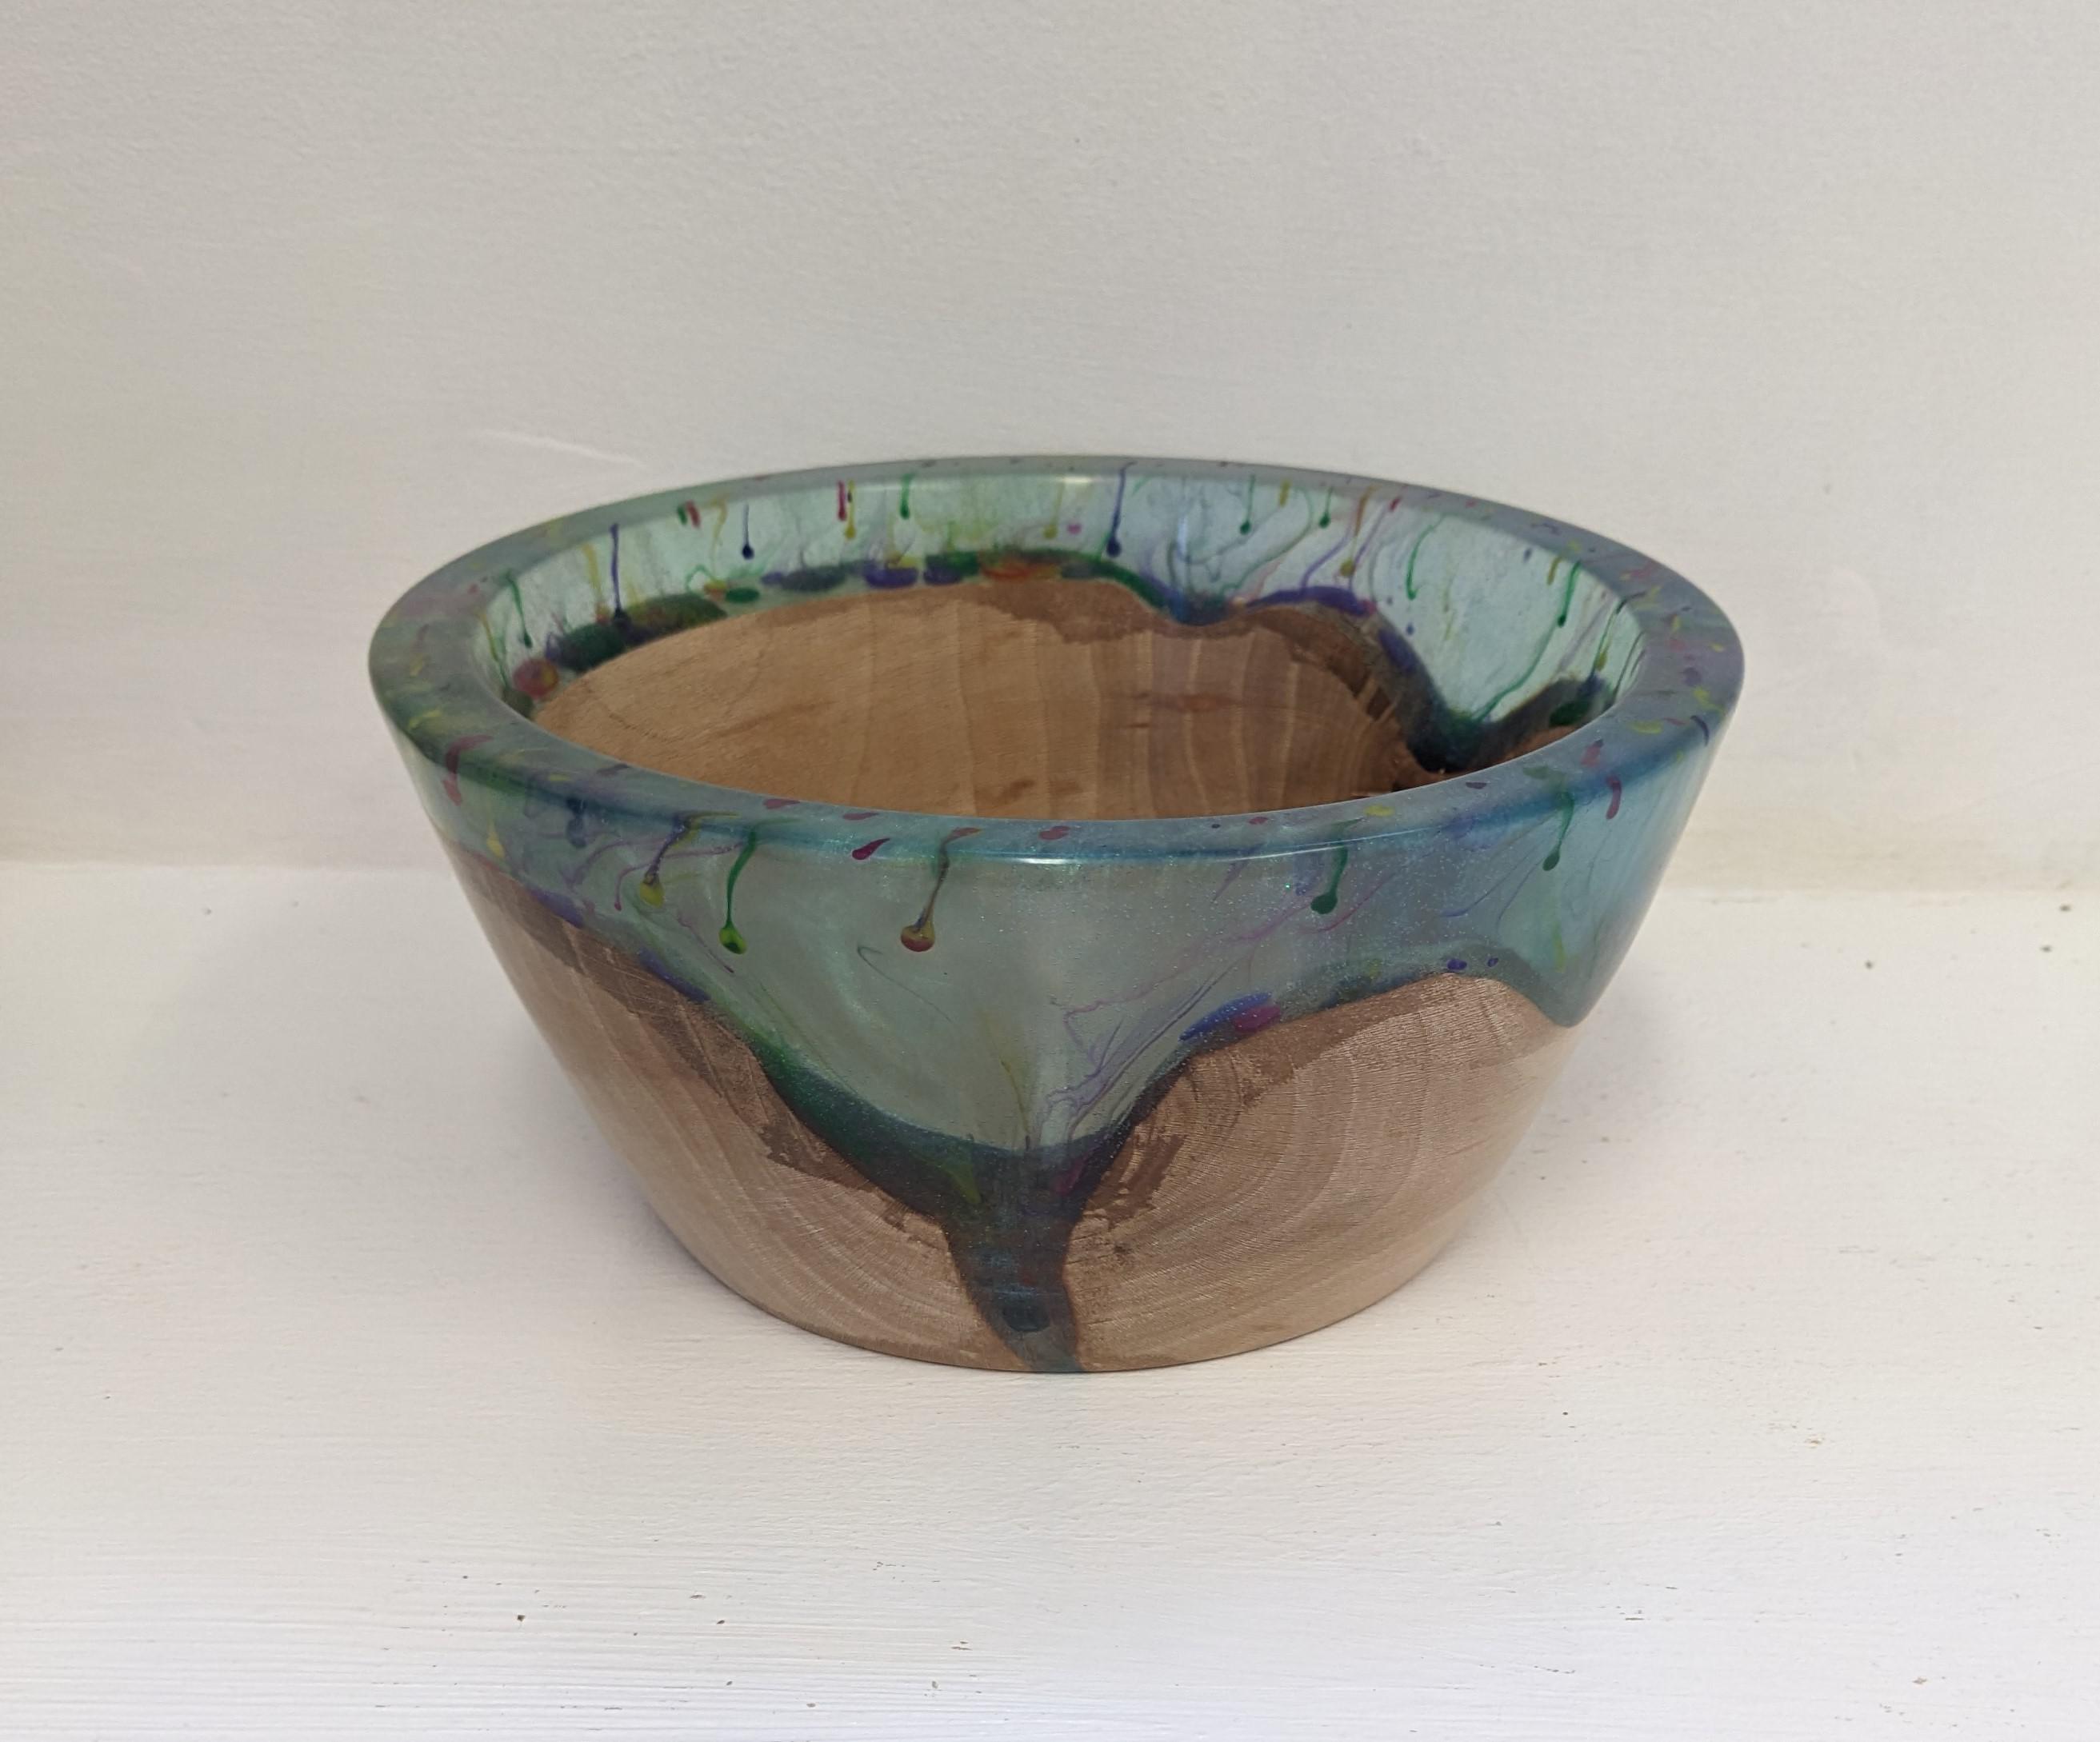 London Plane and Resin Bowl